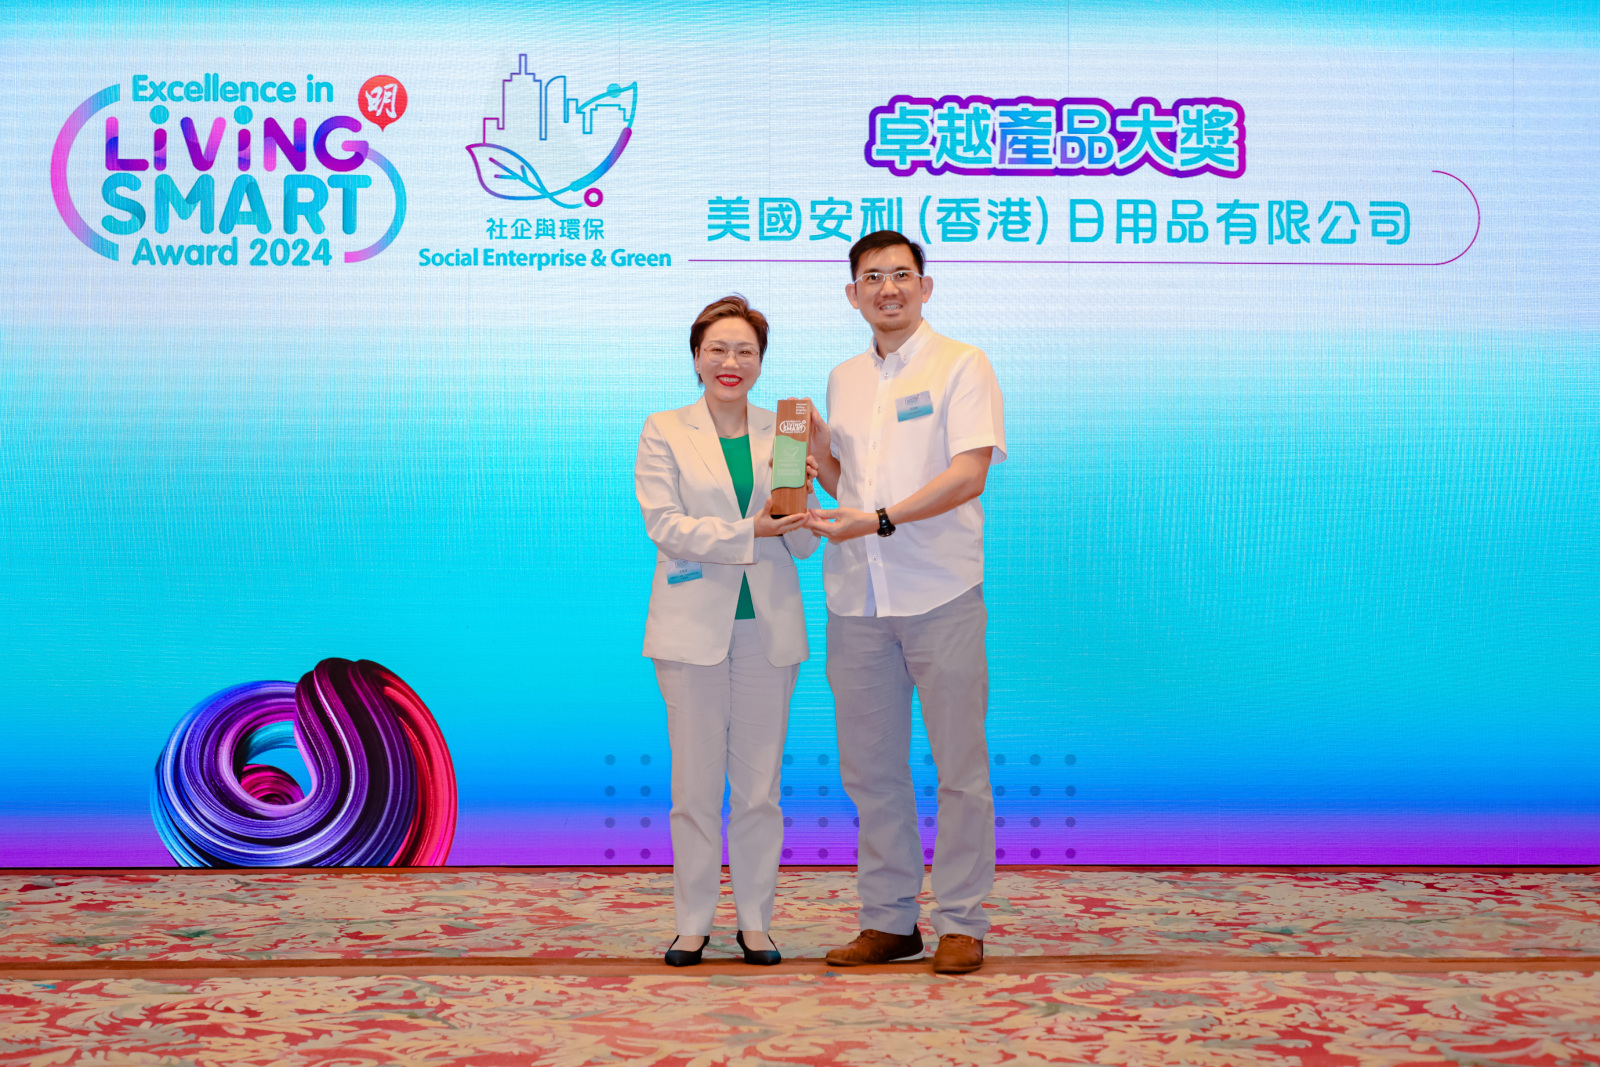 Amway Hong Kong has been Awarded “Social Enterprise & Green – Excellence in product 2024” by Mingpao.com